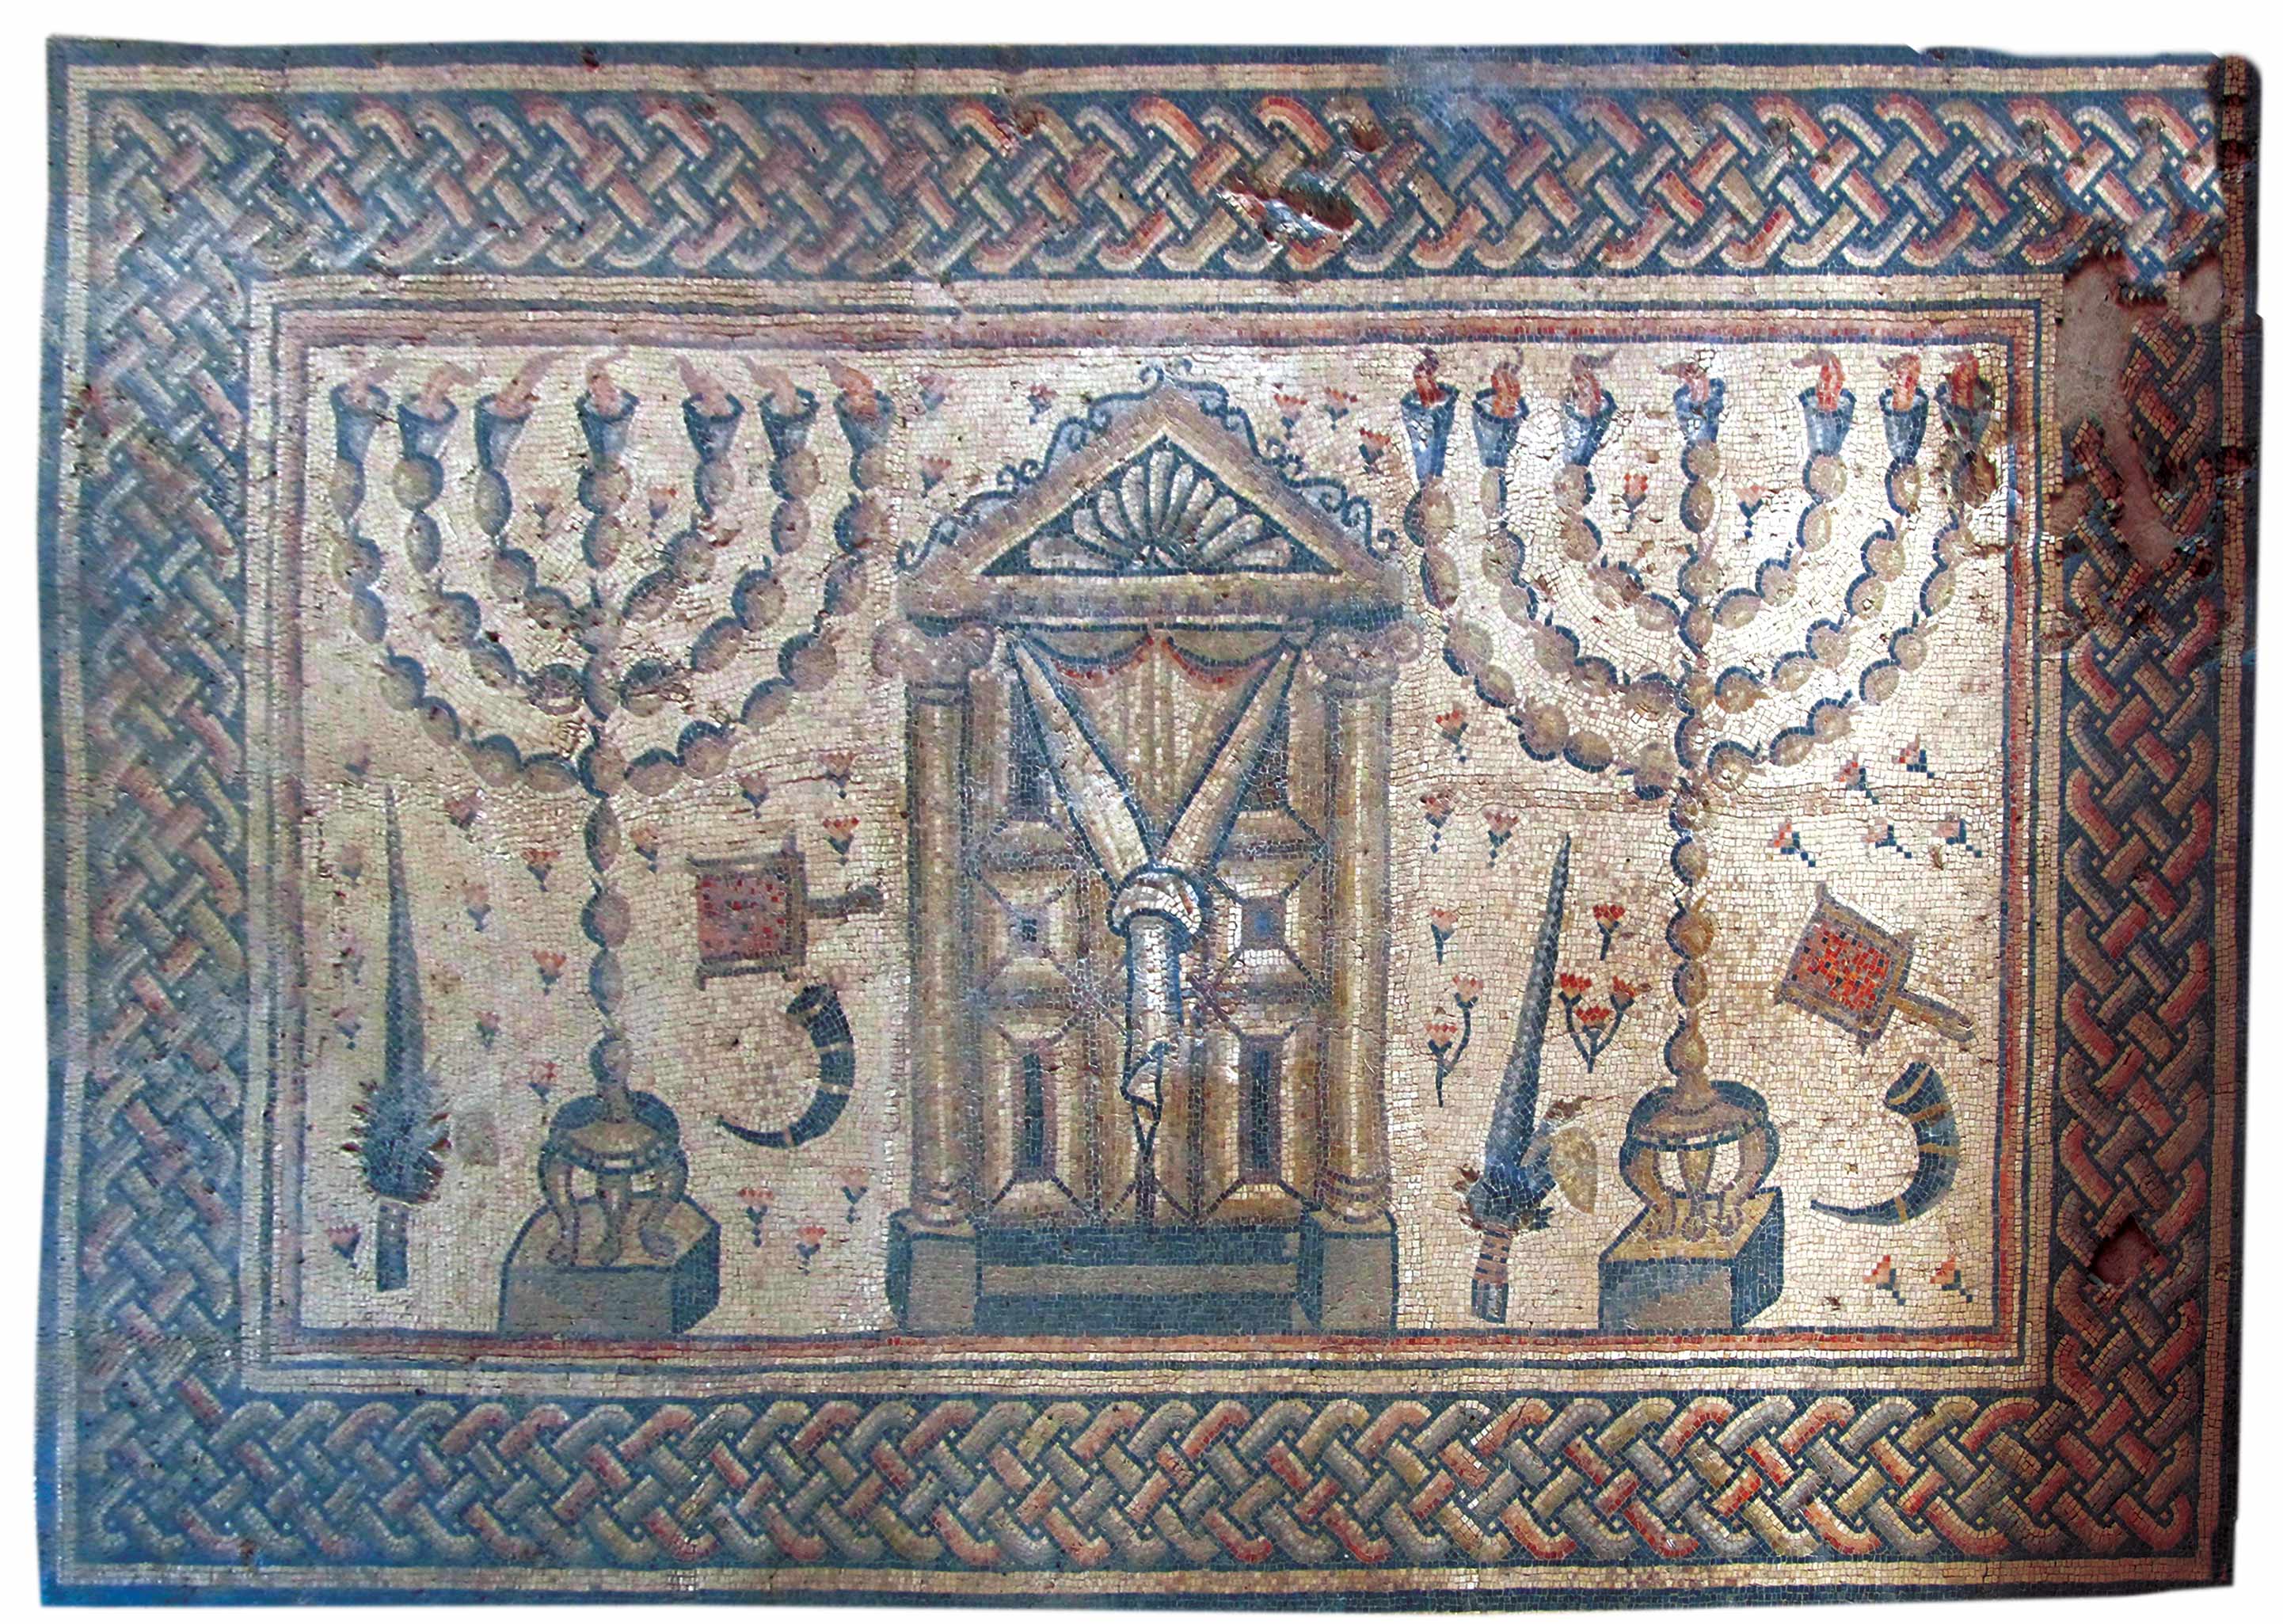 Shofars figure prominently in ancient synagogue mosaics. In this fragment from Hamat Tiberias, found in 1921 and dated to the third or fourth century, two shofars appear among the four species, seven-branched menoras, and coal pans surrounding what may represent the Temple façade